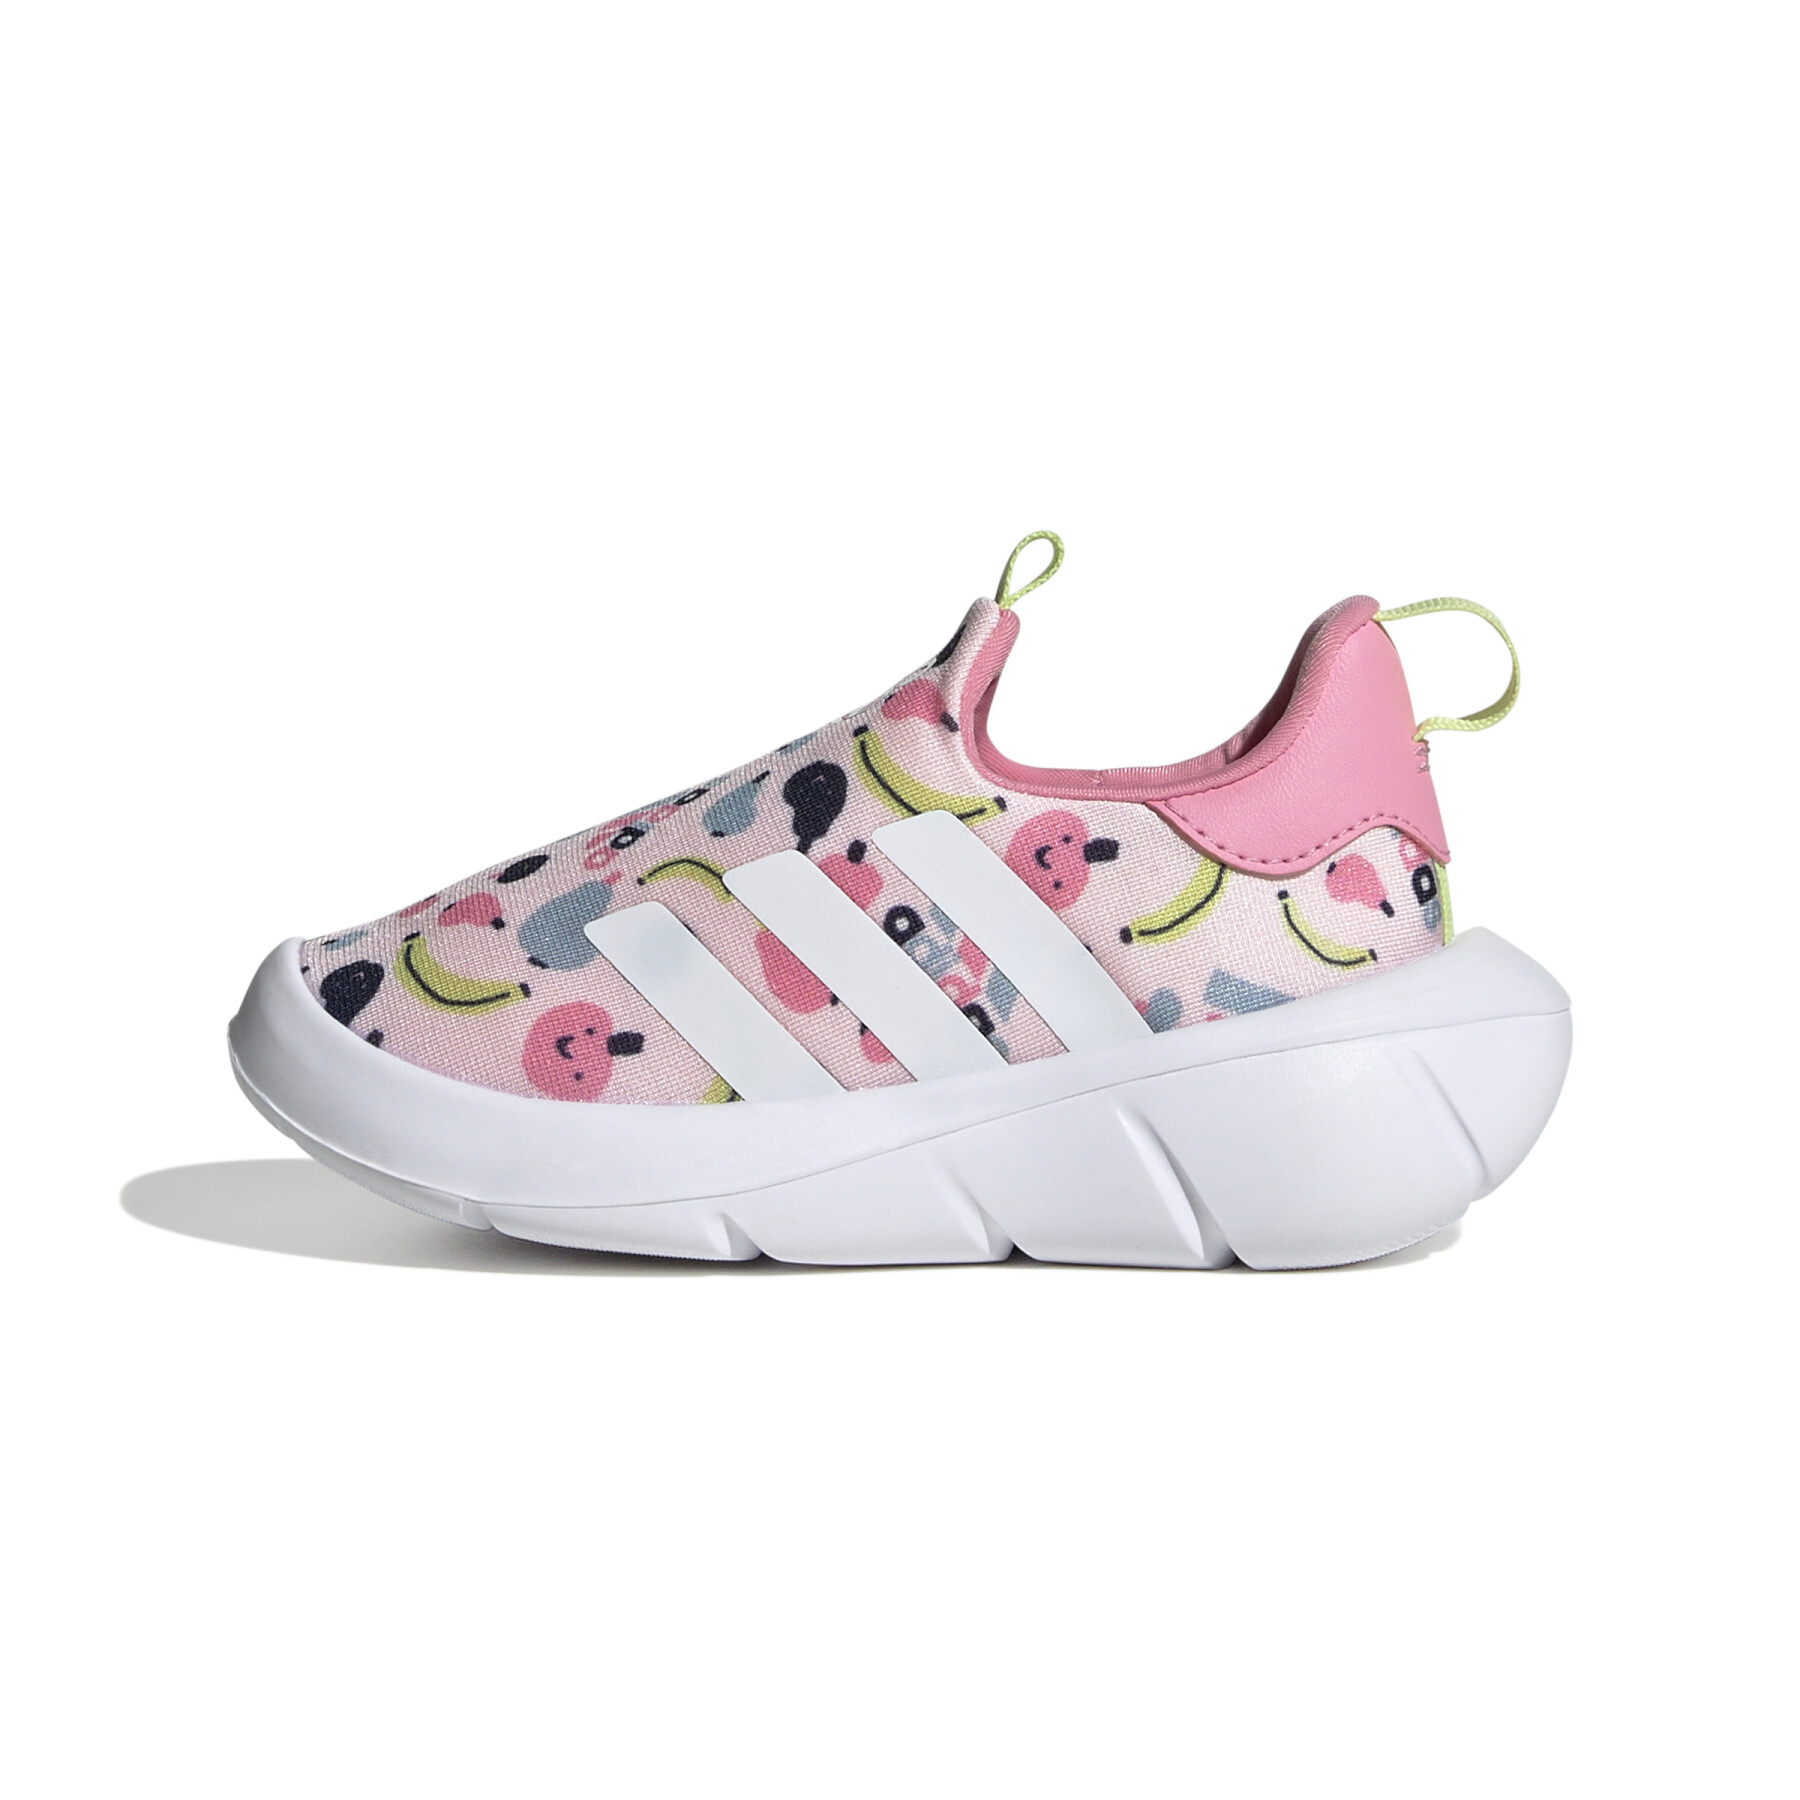 Baby sneakers adidas Monofit